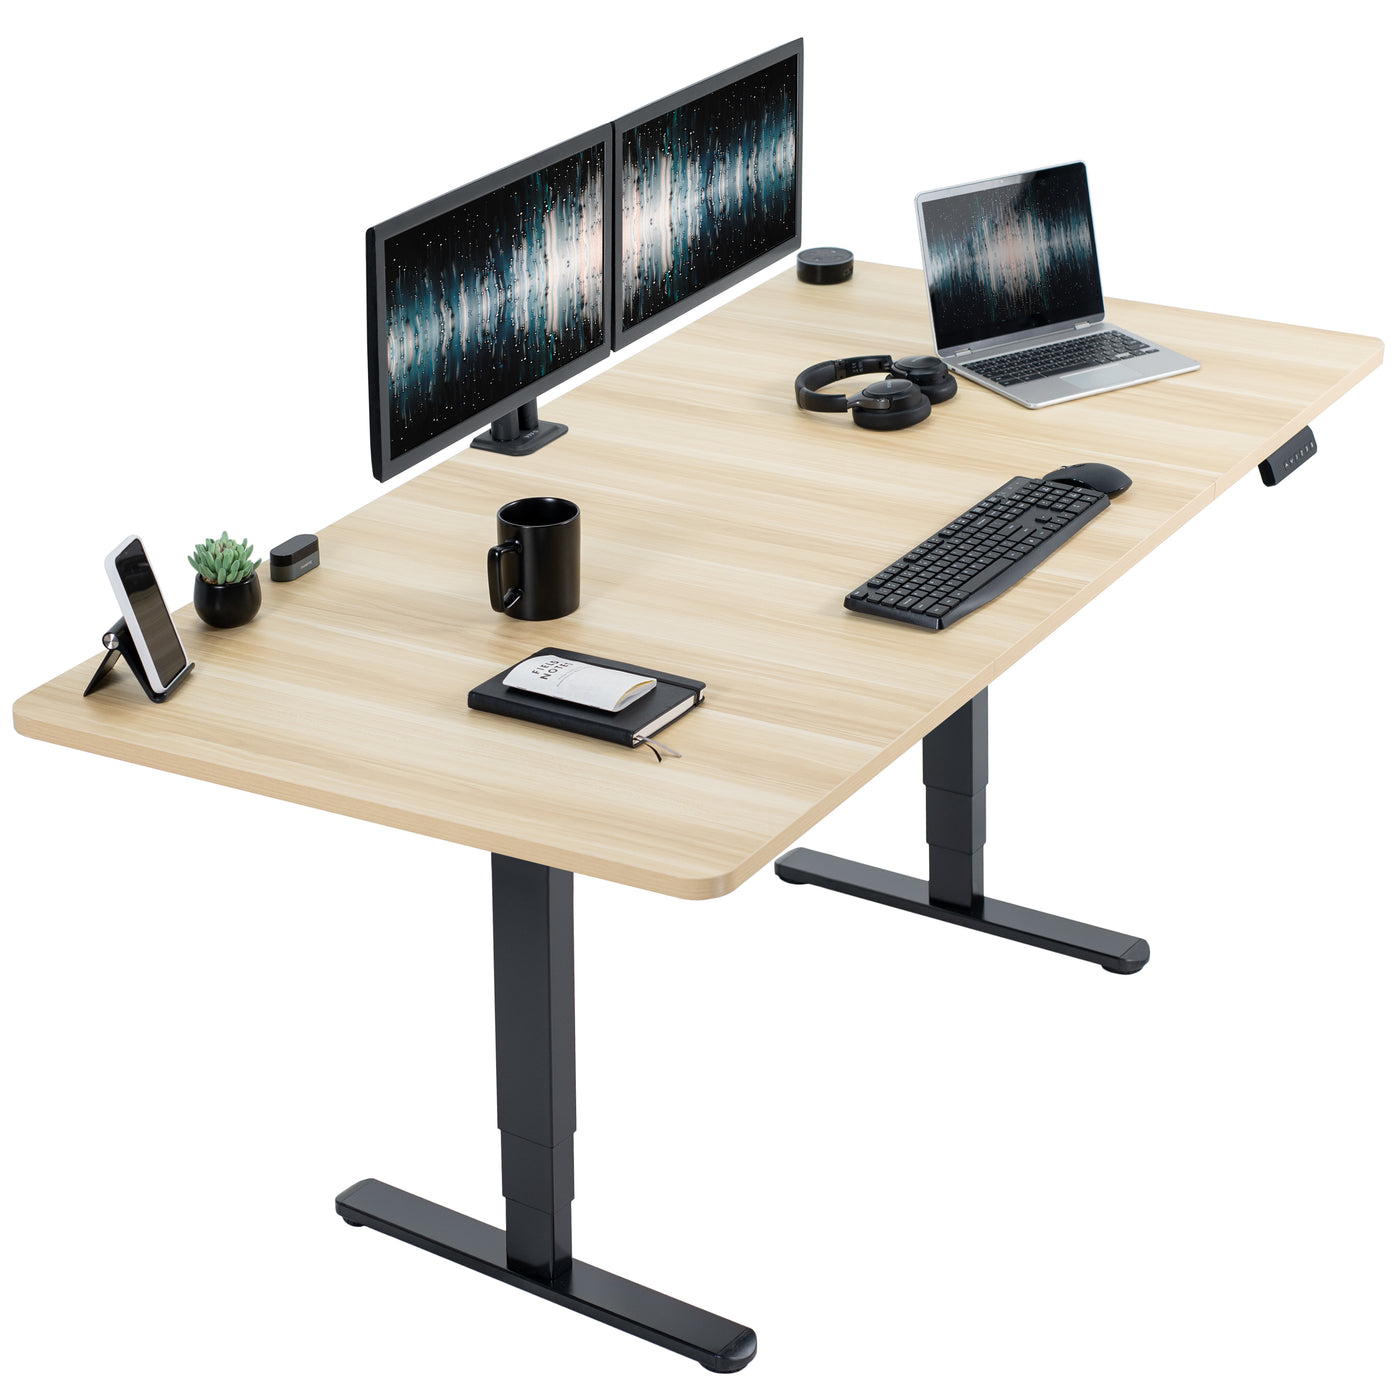 71" x 36" Electric Desk provides a convenient sit and stand workstation for the home or office.